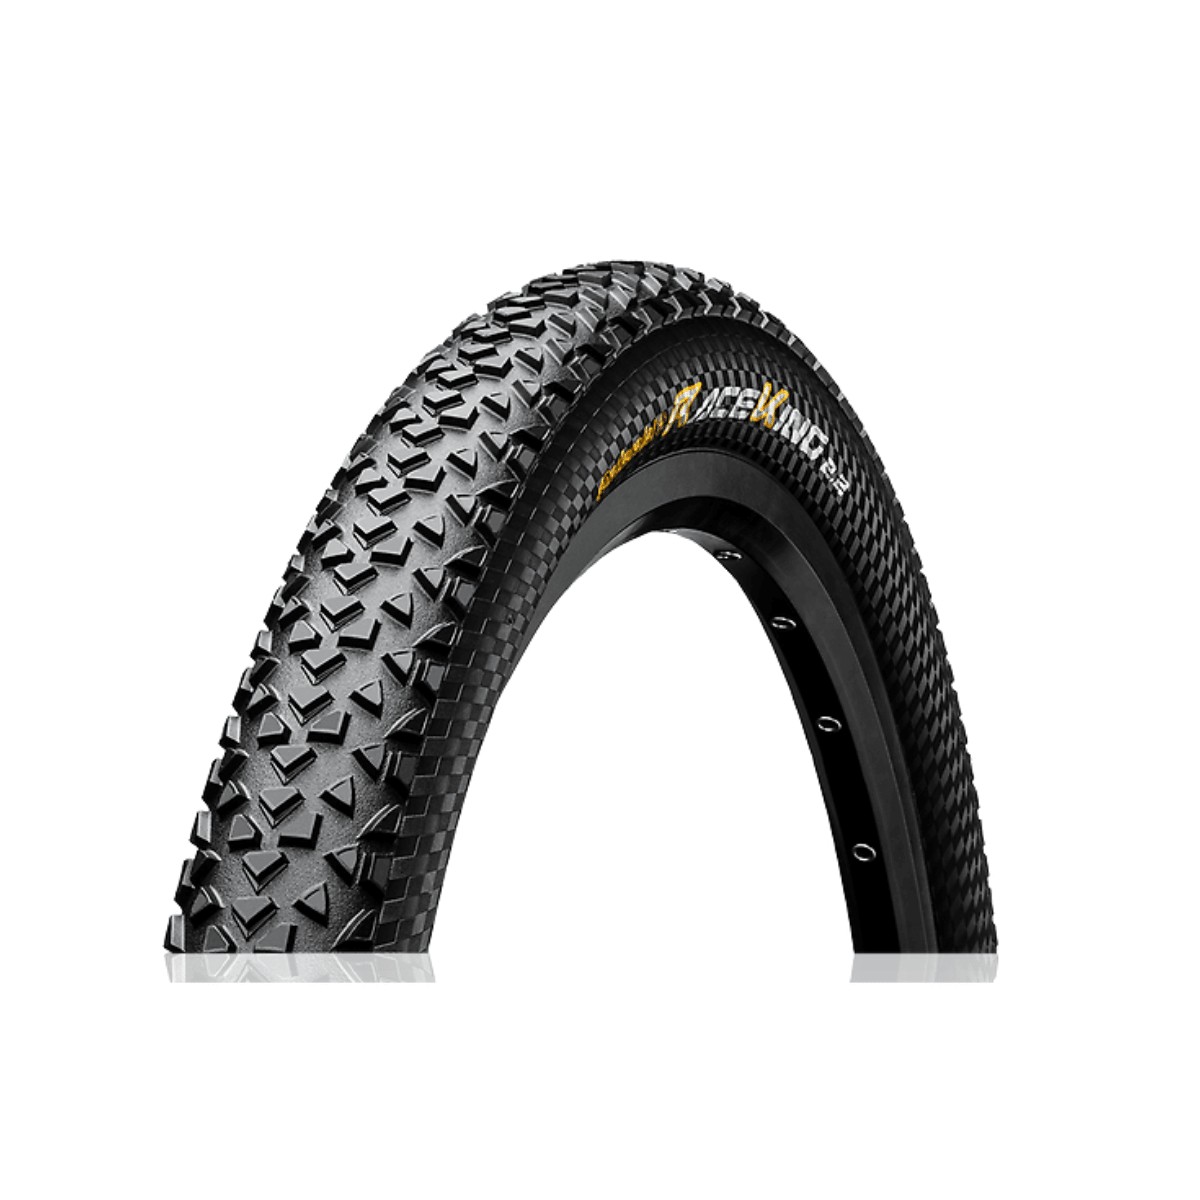 Tubeless Ready günstig Kaufen-Continental Race King Protection 26, 27'5 oder 29 x 2.20 Tubeless Ready Reifen, Größe 27.5"x2.20. Continental Race King Protection 26, 27'5 oder 29 x 2.20 Tubeless Ready Reifen, Größe 27.5"x2.20 <![CDATA[Hauptmerkmale Continent